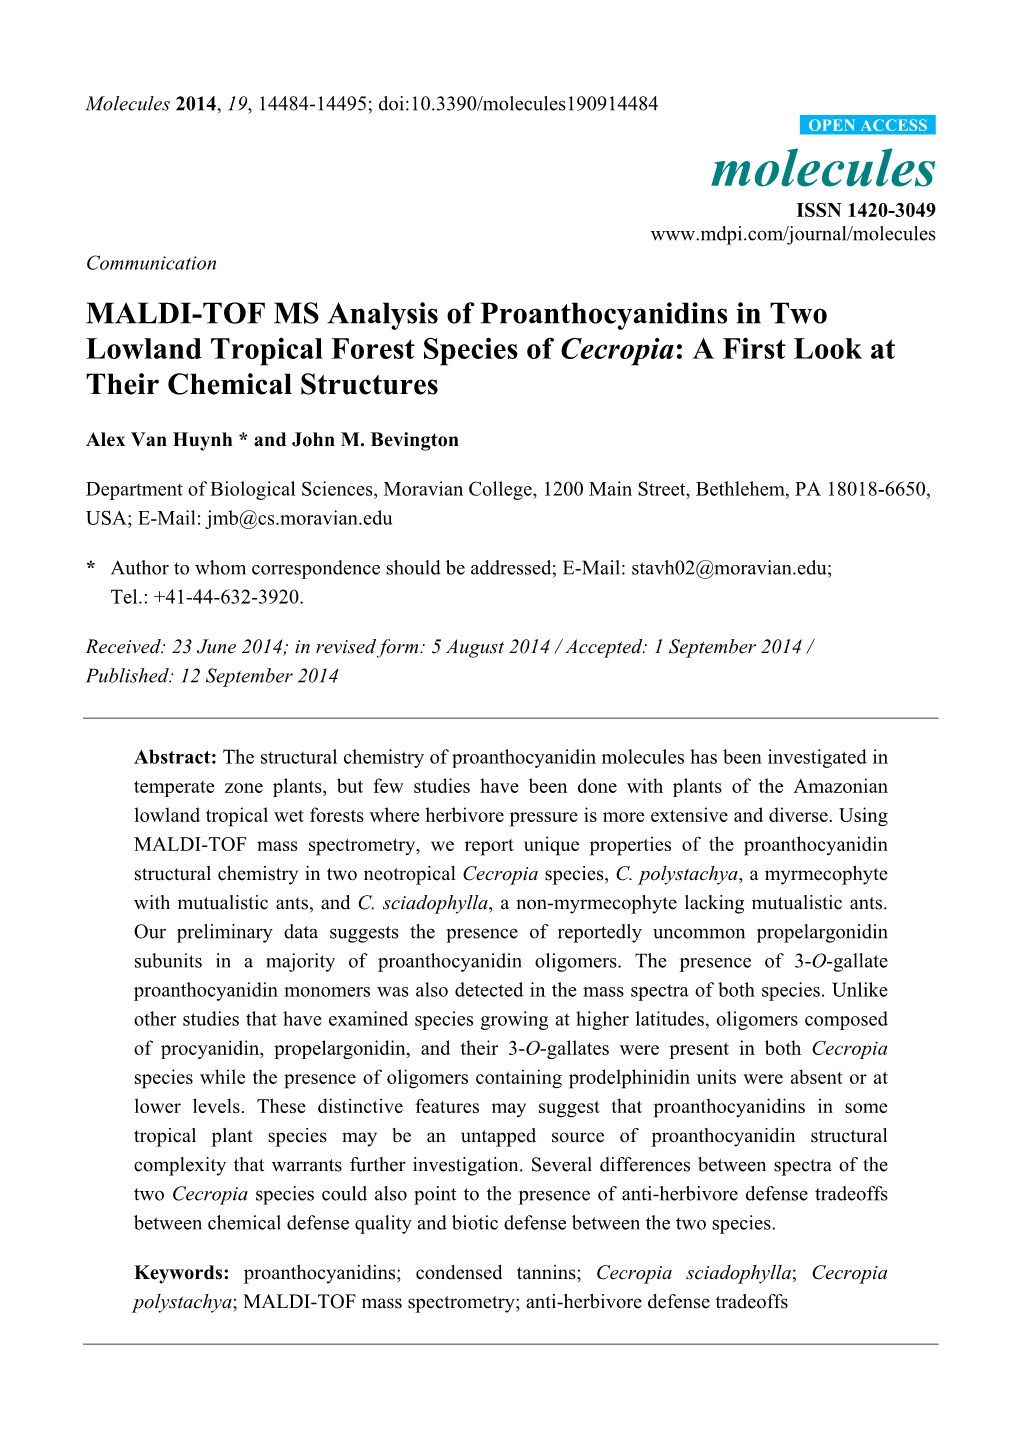 MALDI-TOF MS Analysis of Proanthocyanidins in Two Lowland Tropical Forest Species of Cecropia: a First Look at Their Chemical Structures